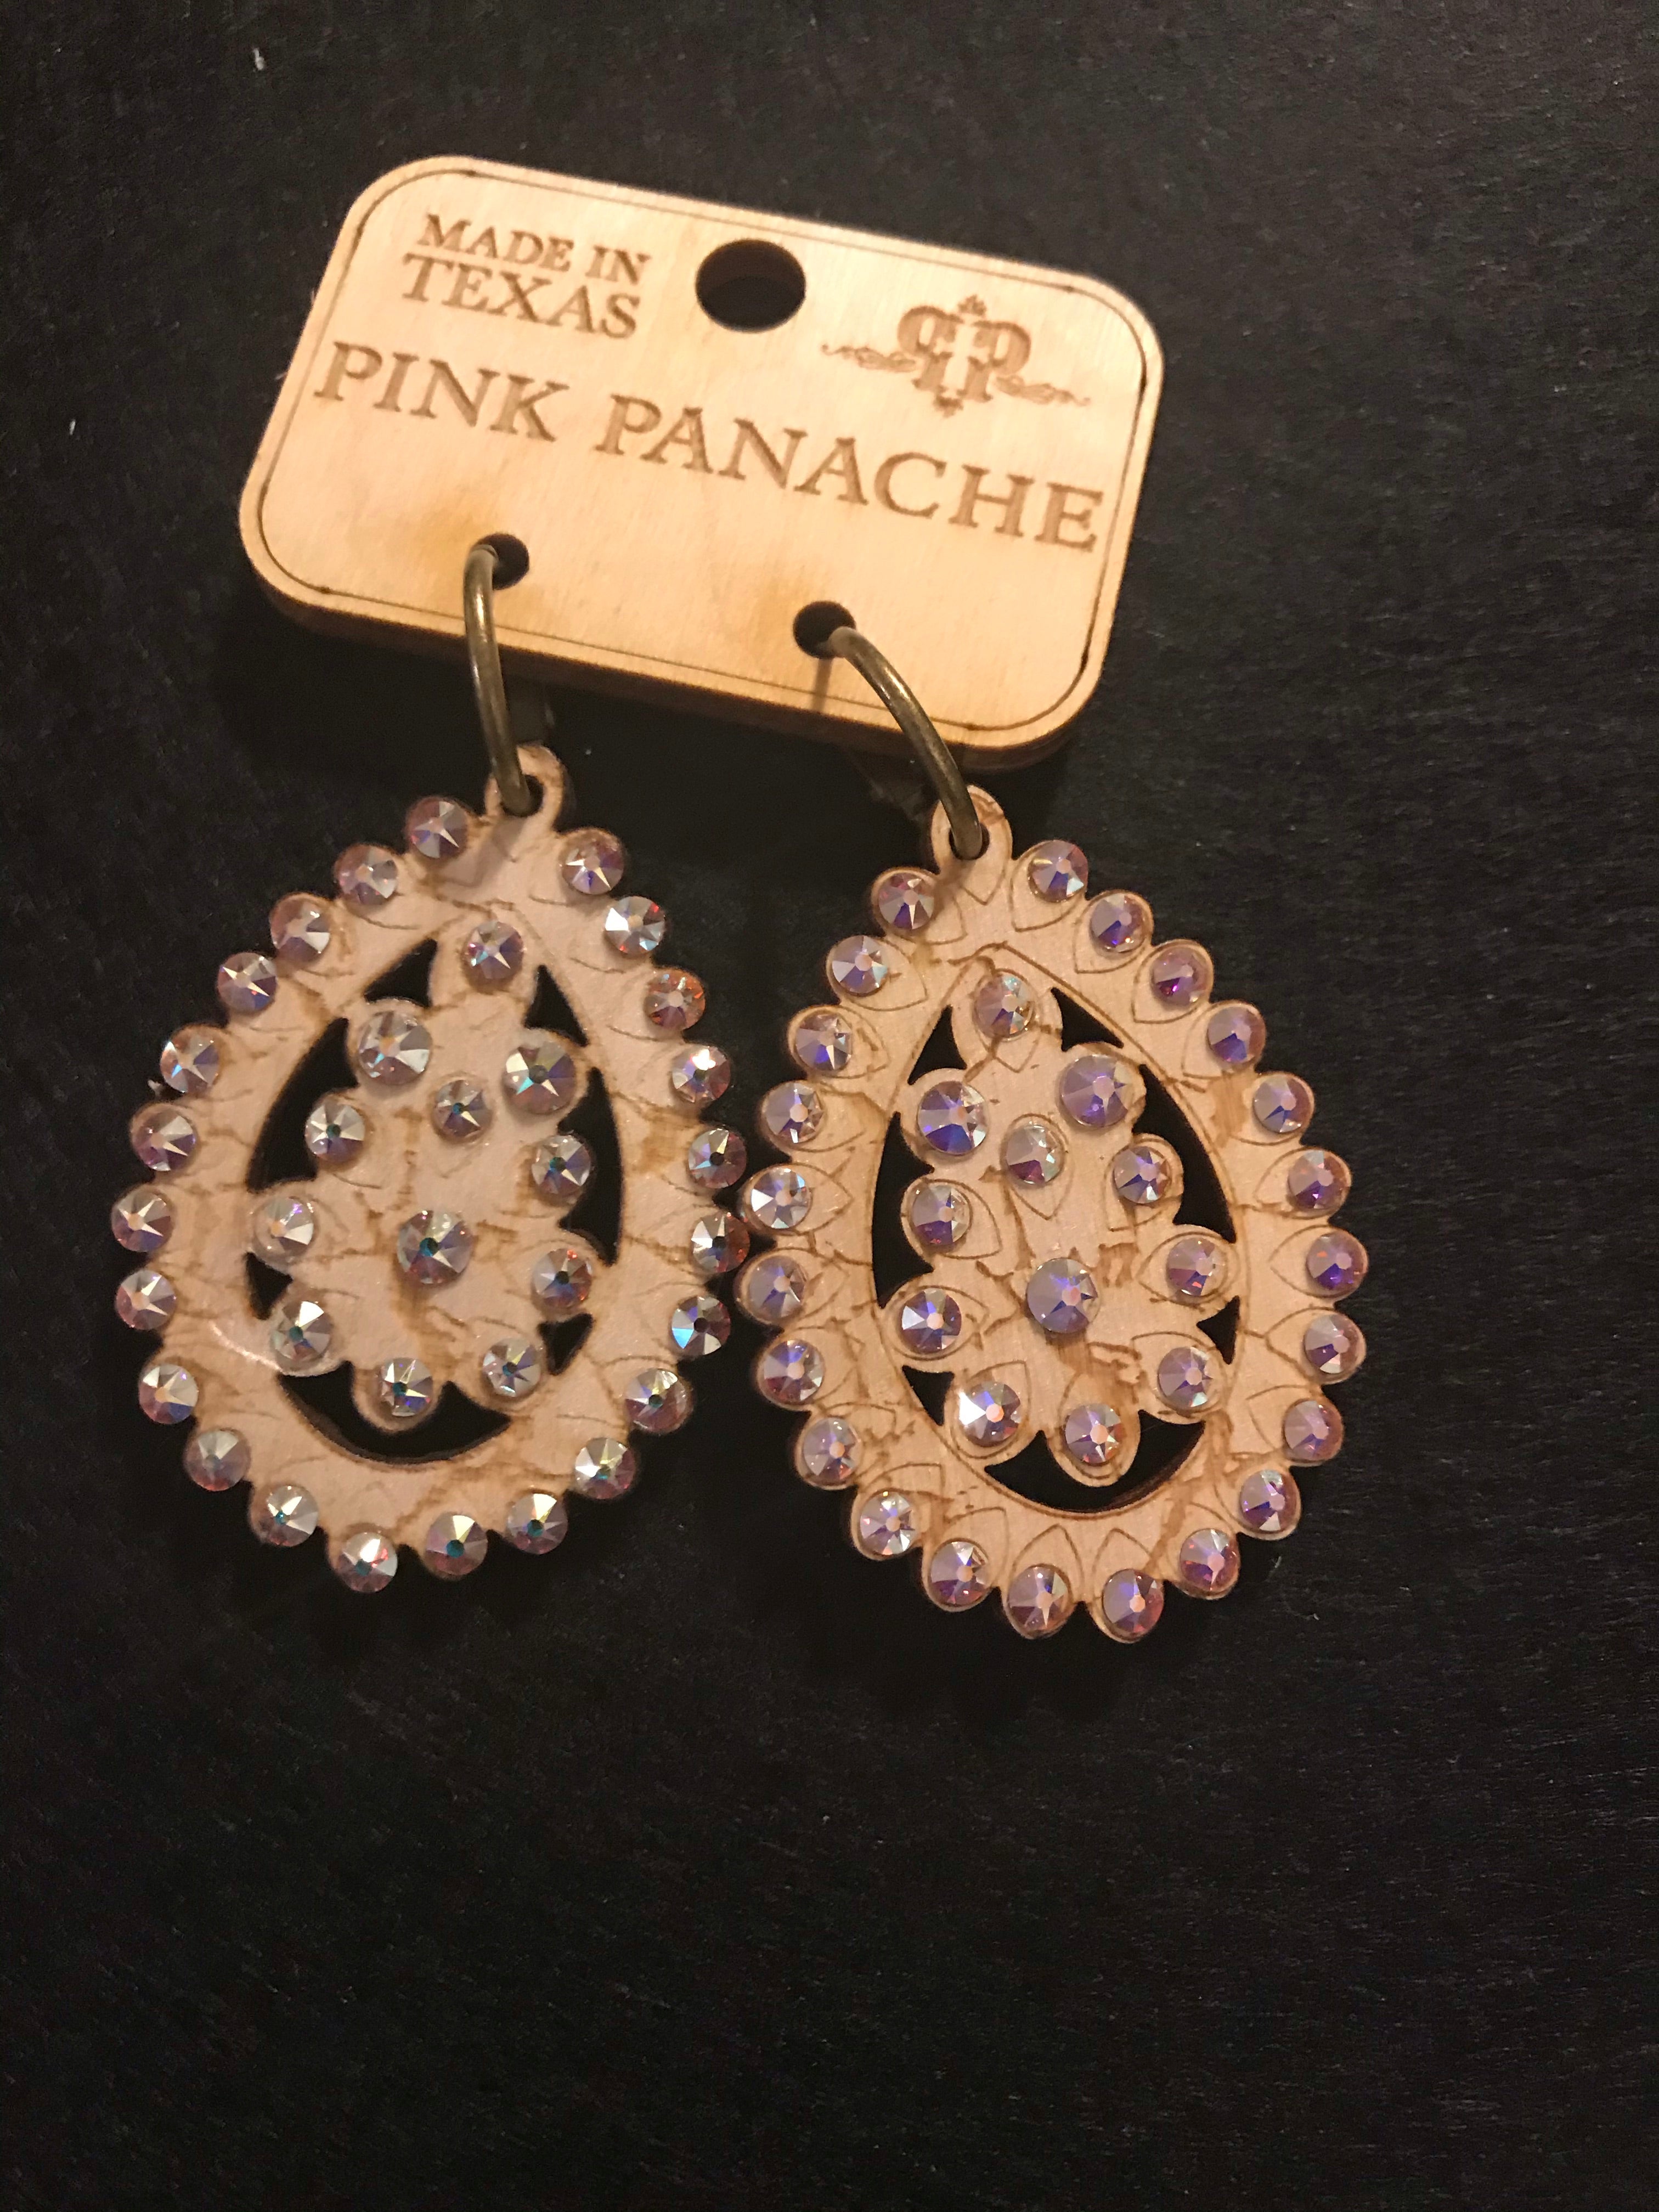 Small Santa Fe Pearl White with Crystals Pink Panache Earrings